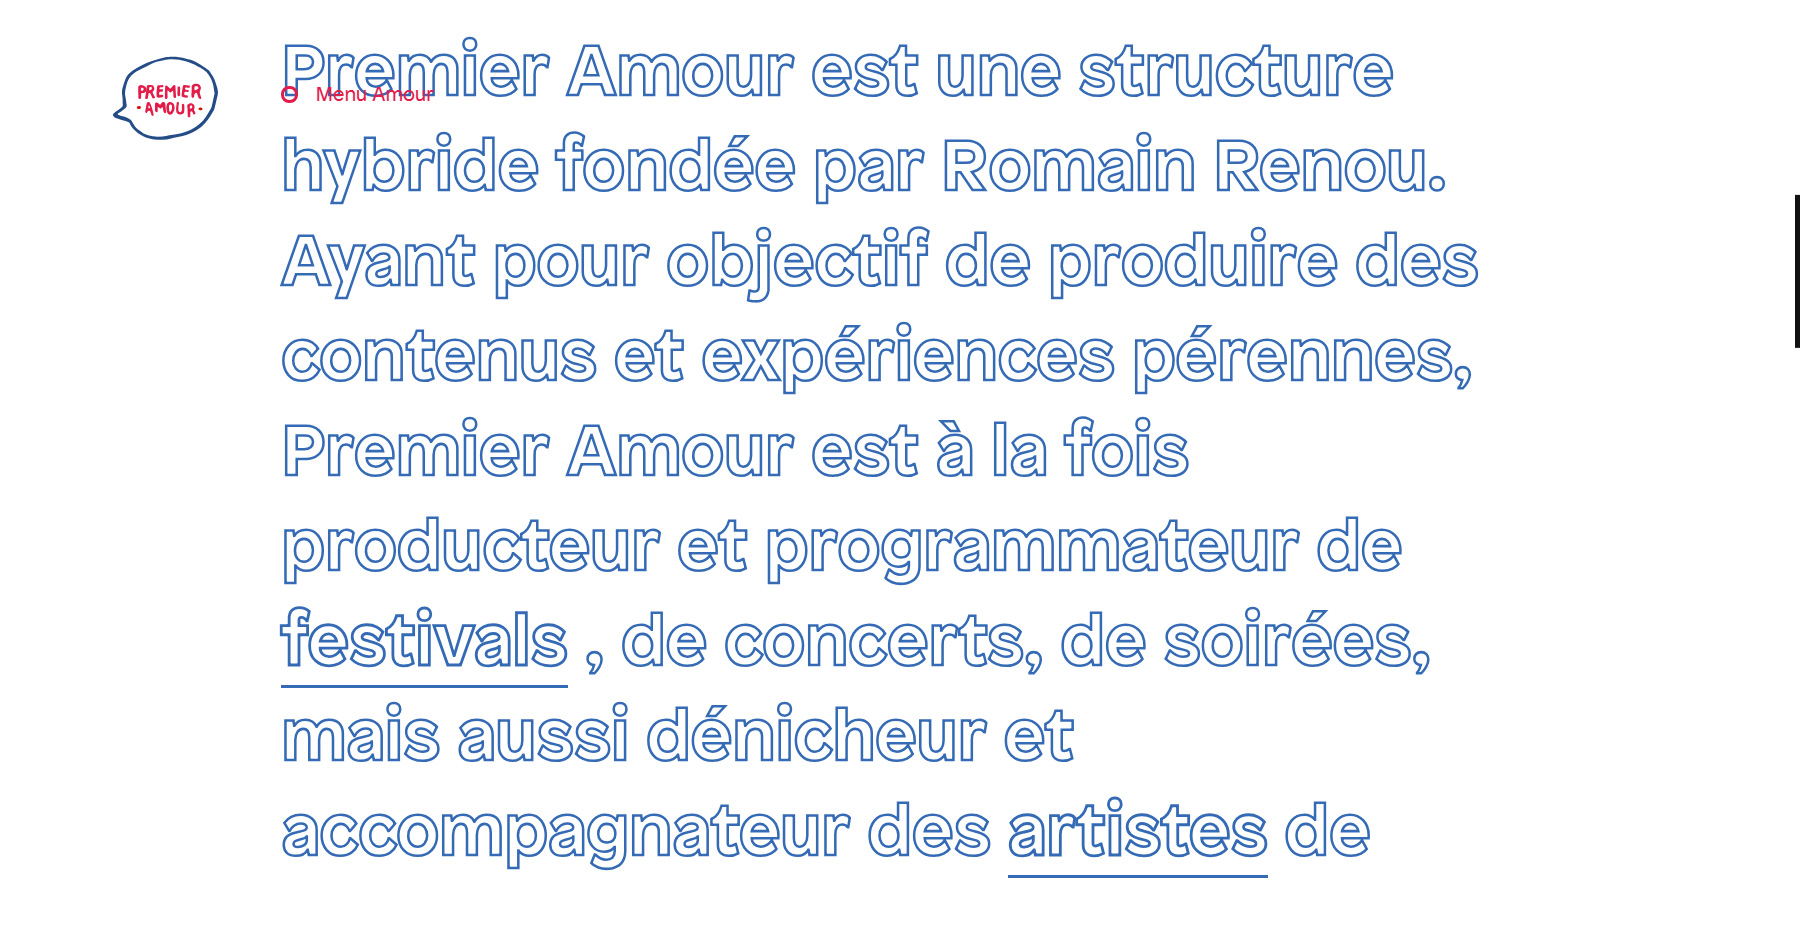 Premier Amour - Website of the Day